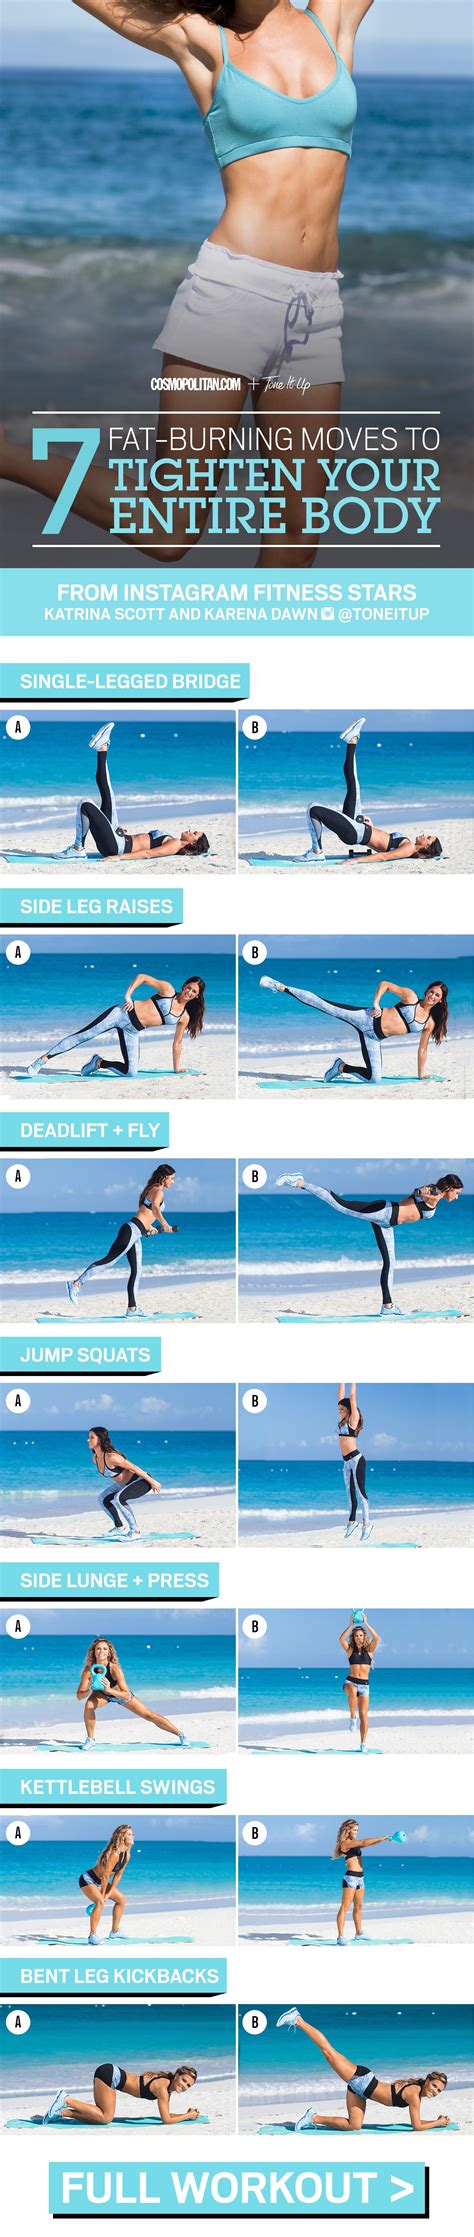 Try The Workout That Will Make You Want To Wear A Bikini